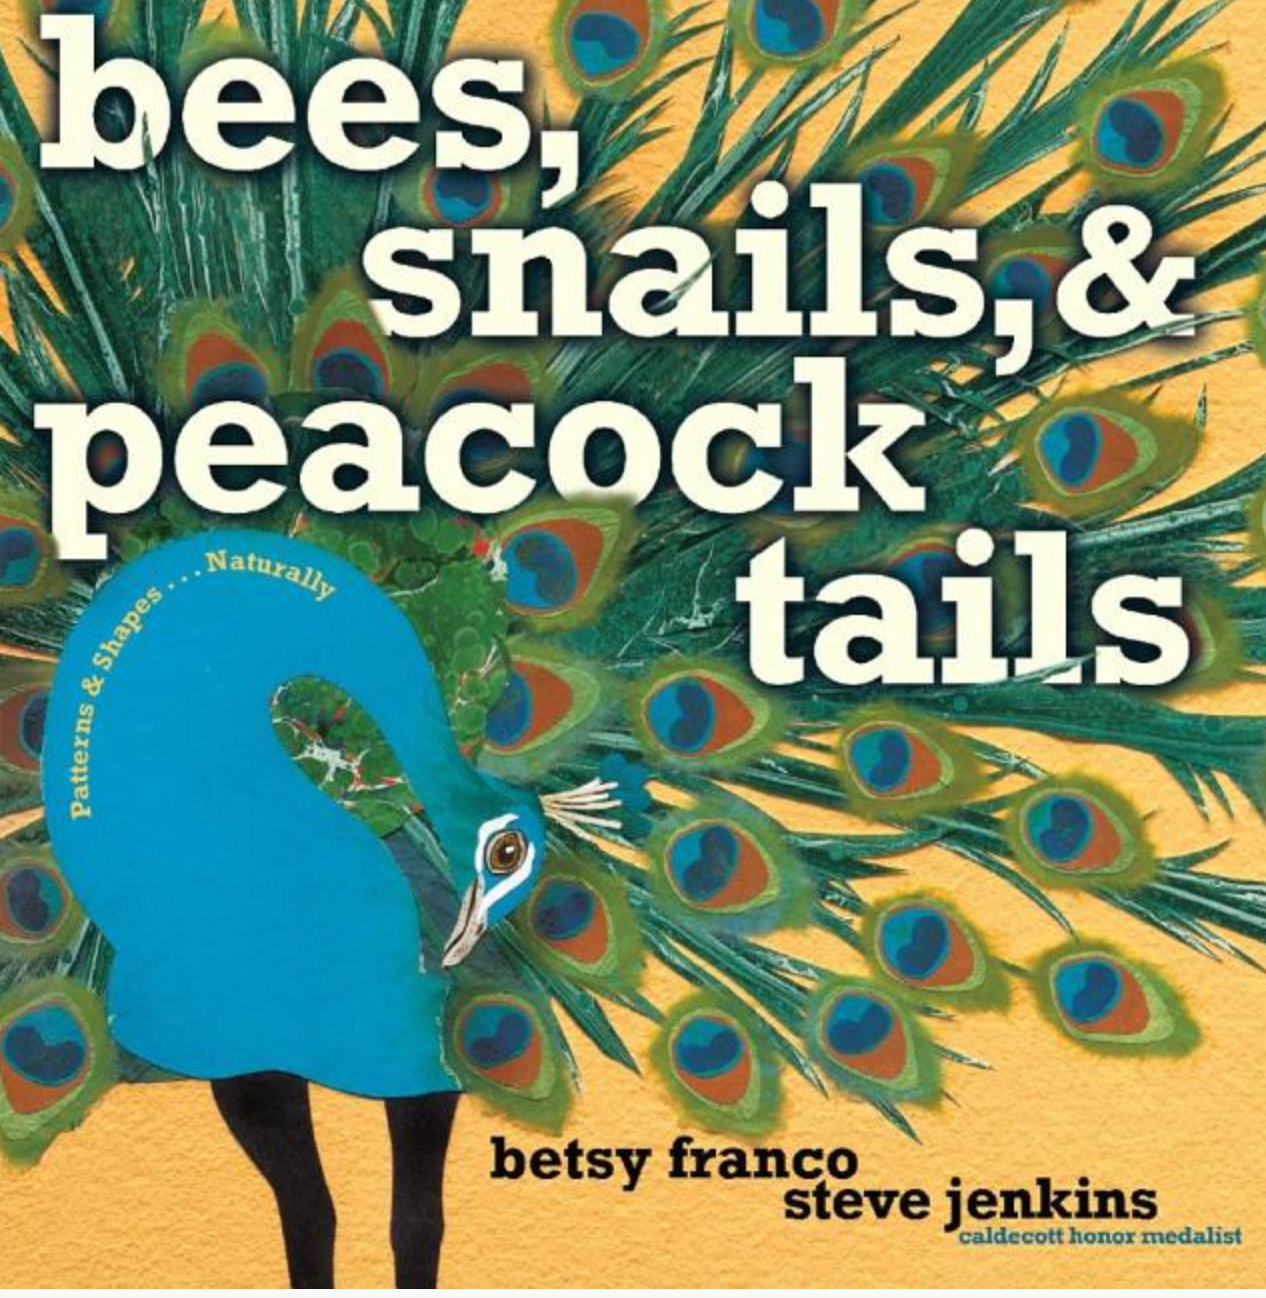 Bees, Snails, and Peacock Tails: Patterns and Shapes... Naturally